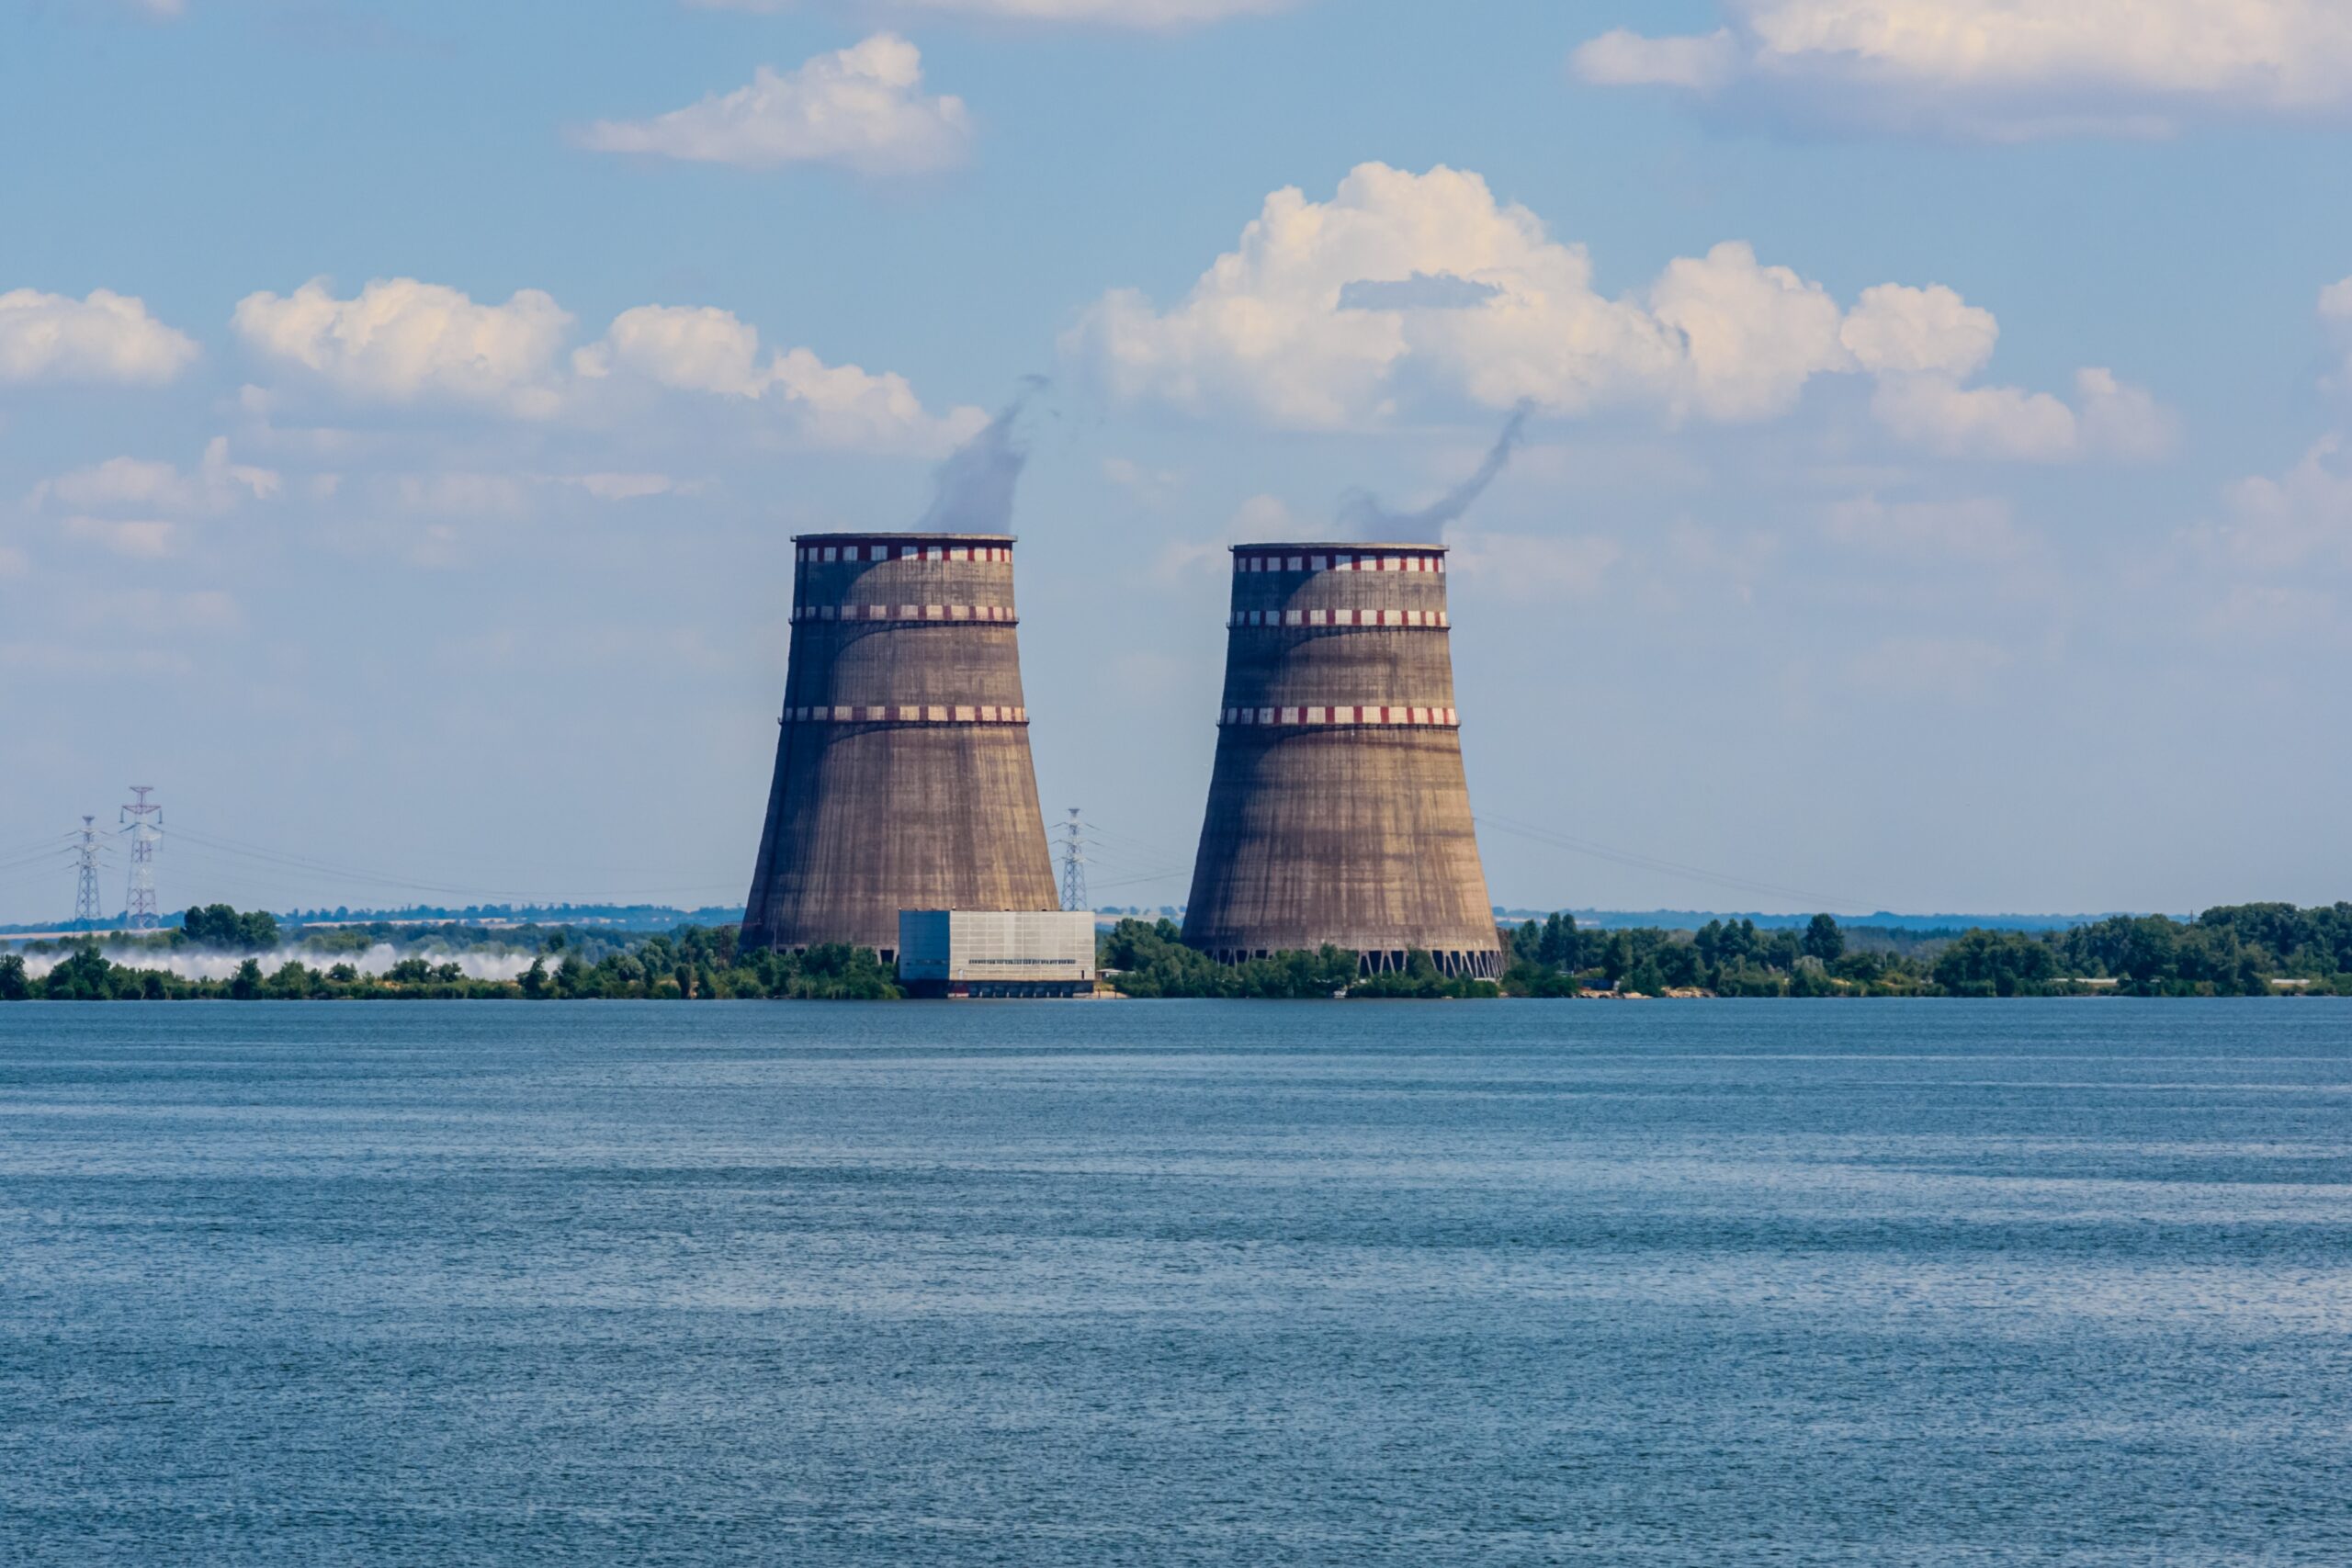 Cooling towers of Zaporizhzhia Nuclear Power Station, Ukraine. The largest nuclear power plant in Europe. Image credits Ihor Bondarenko, Shutterstock.